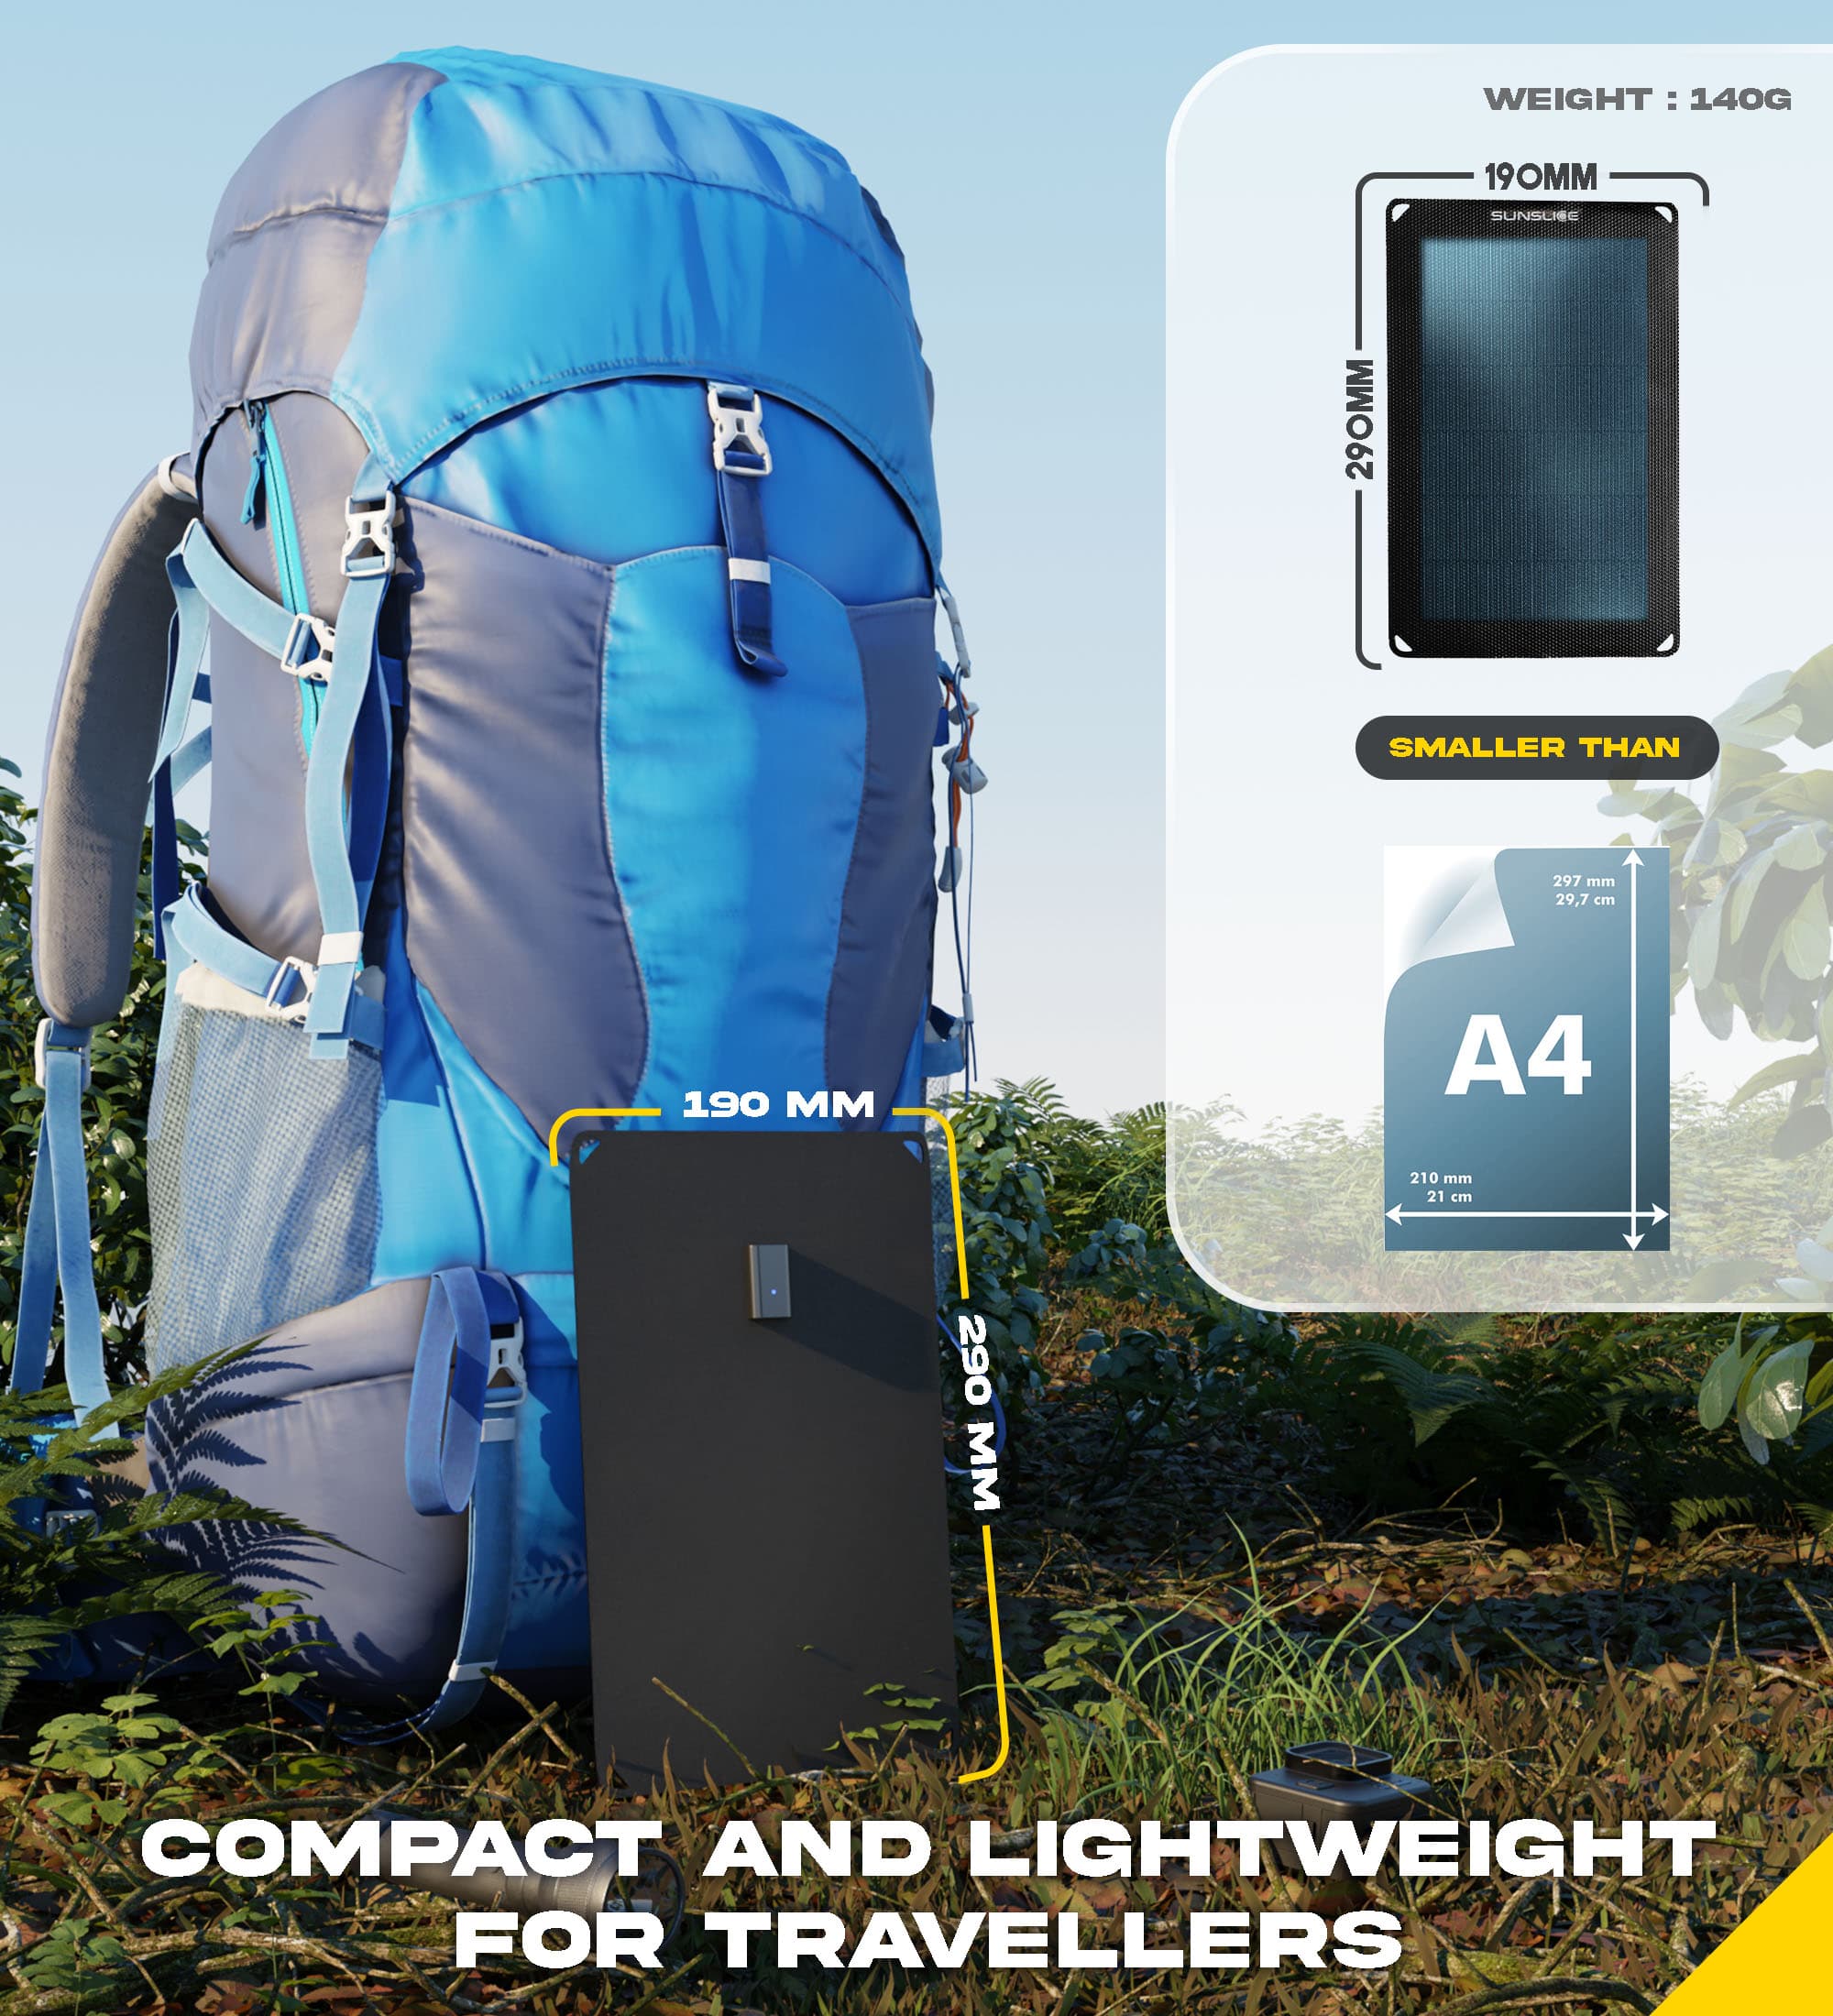 the fusion flex 6 on a backpack. Size:  lenght = 190 mm width = 290 mm Wieght : 140g